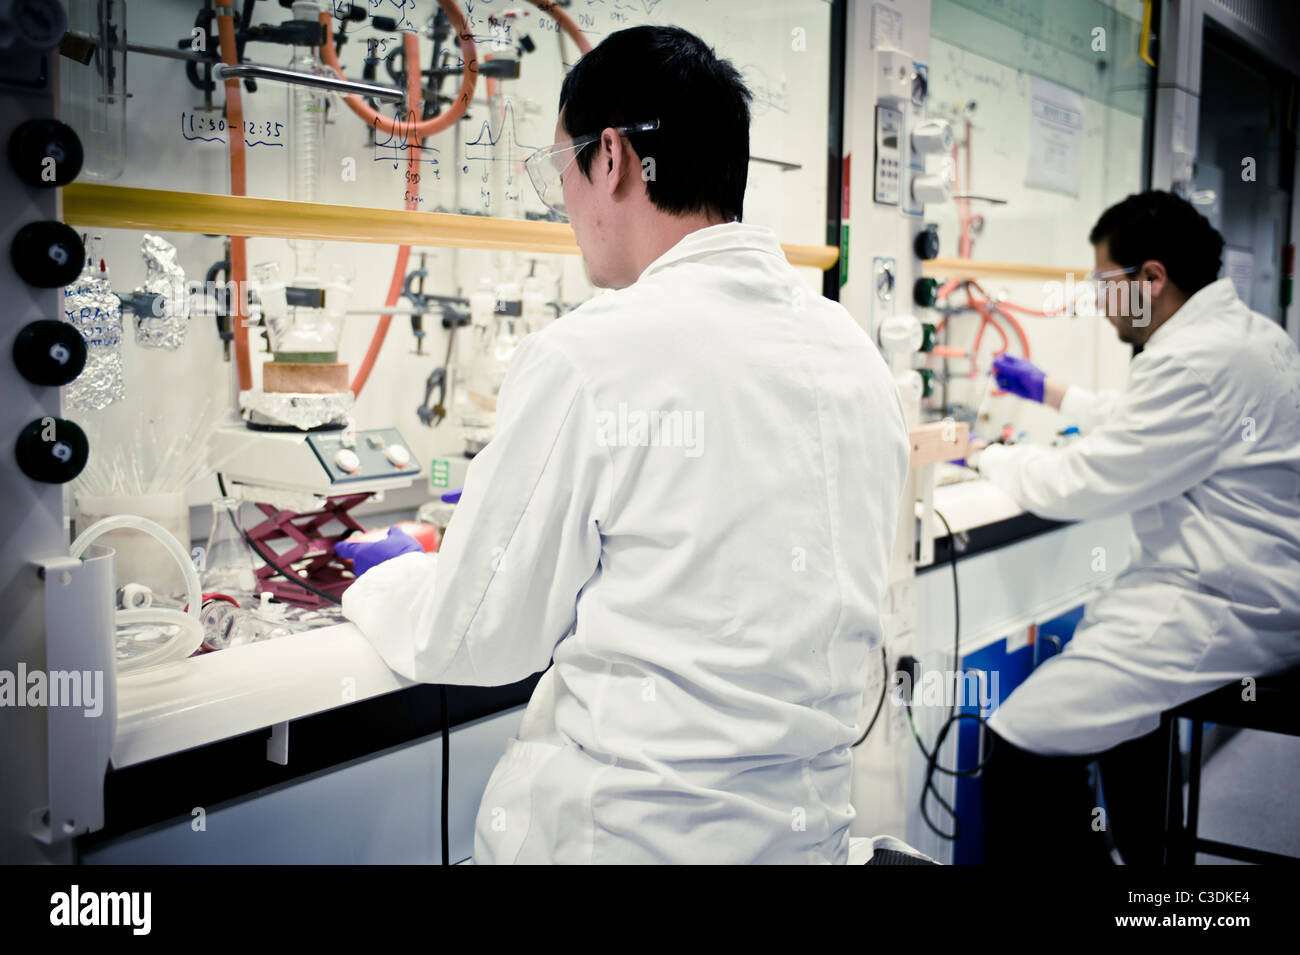 male scientists wearing white lab coats and purple gloves in lab sitting down working at fume cupboard Stock Photo